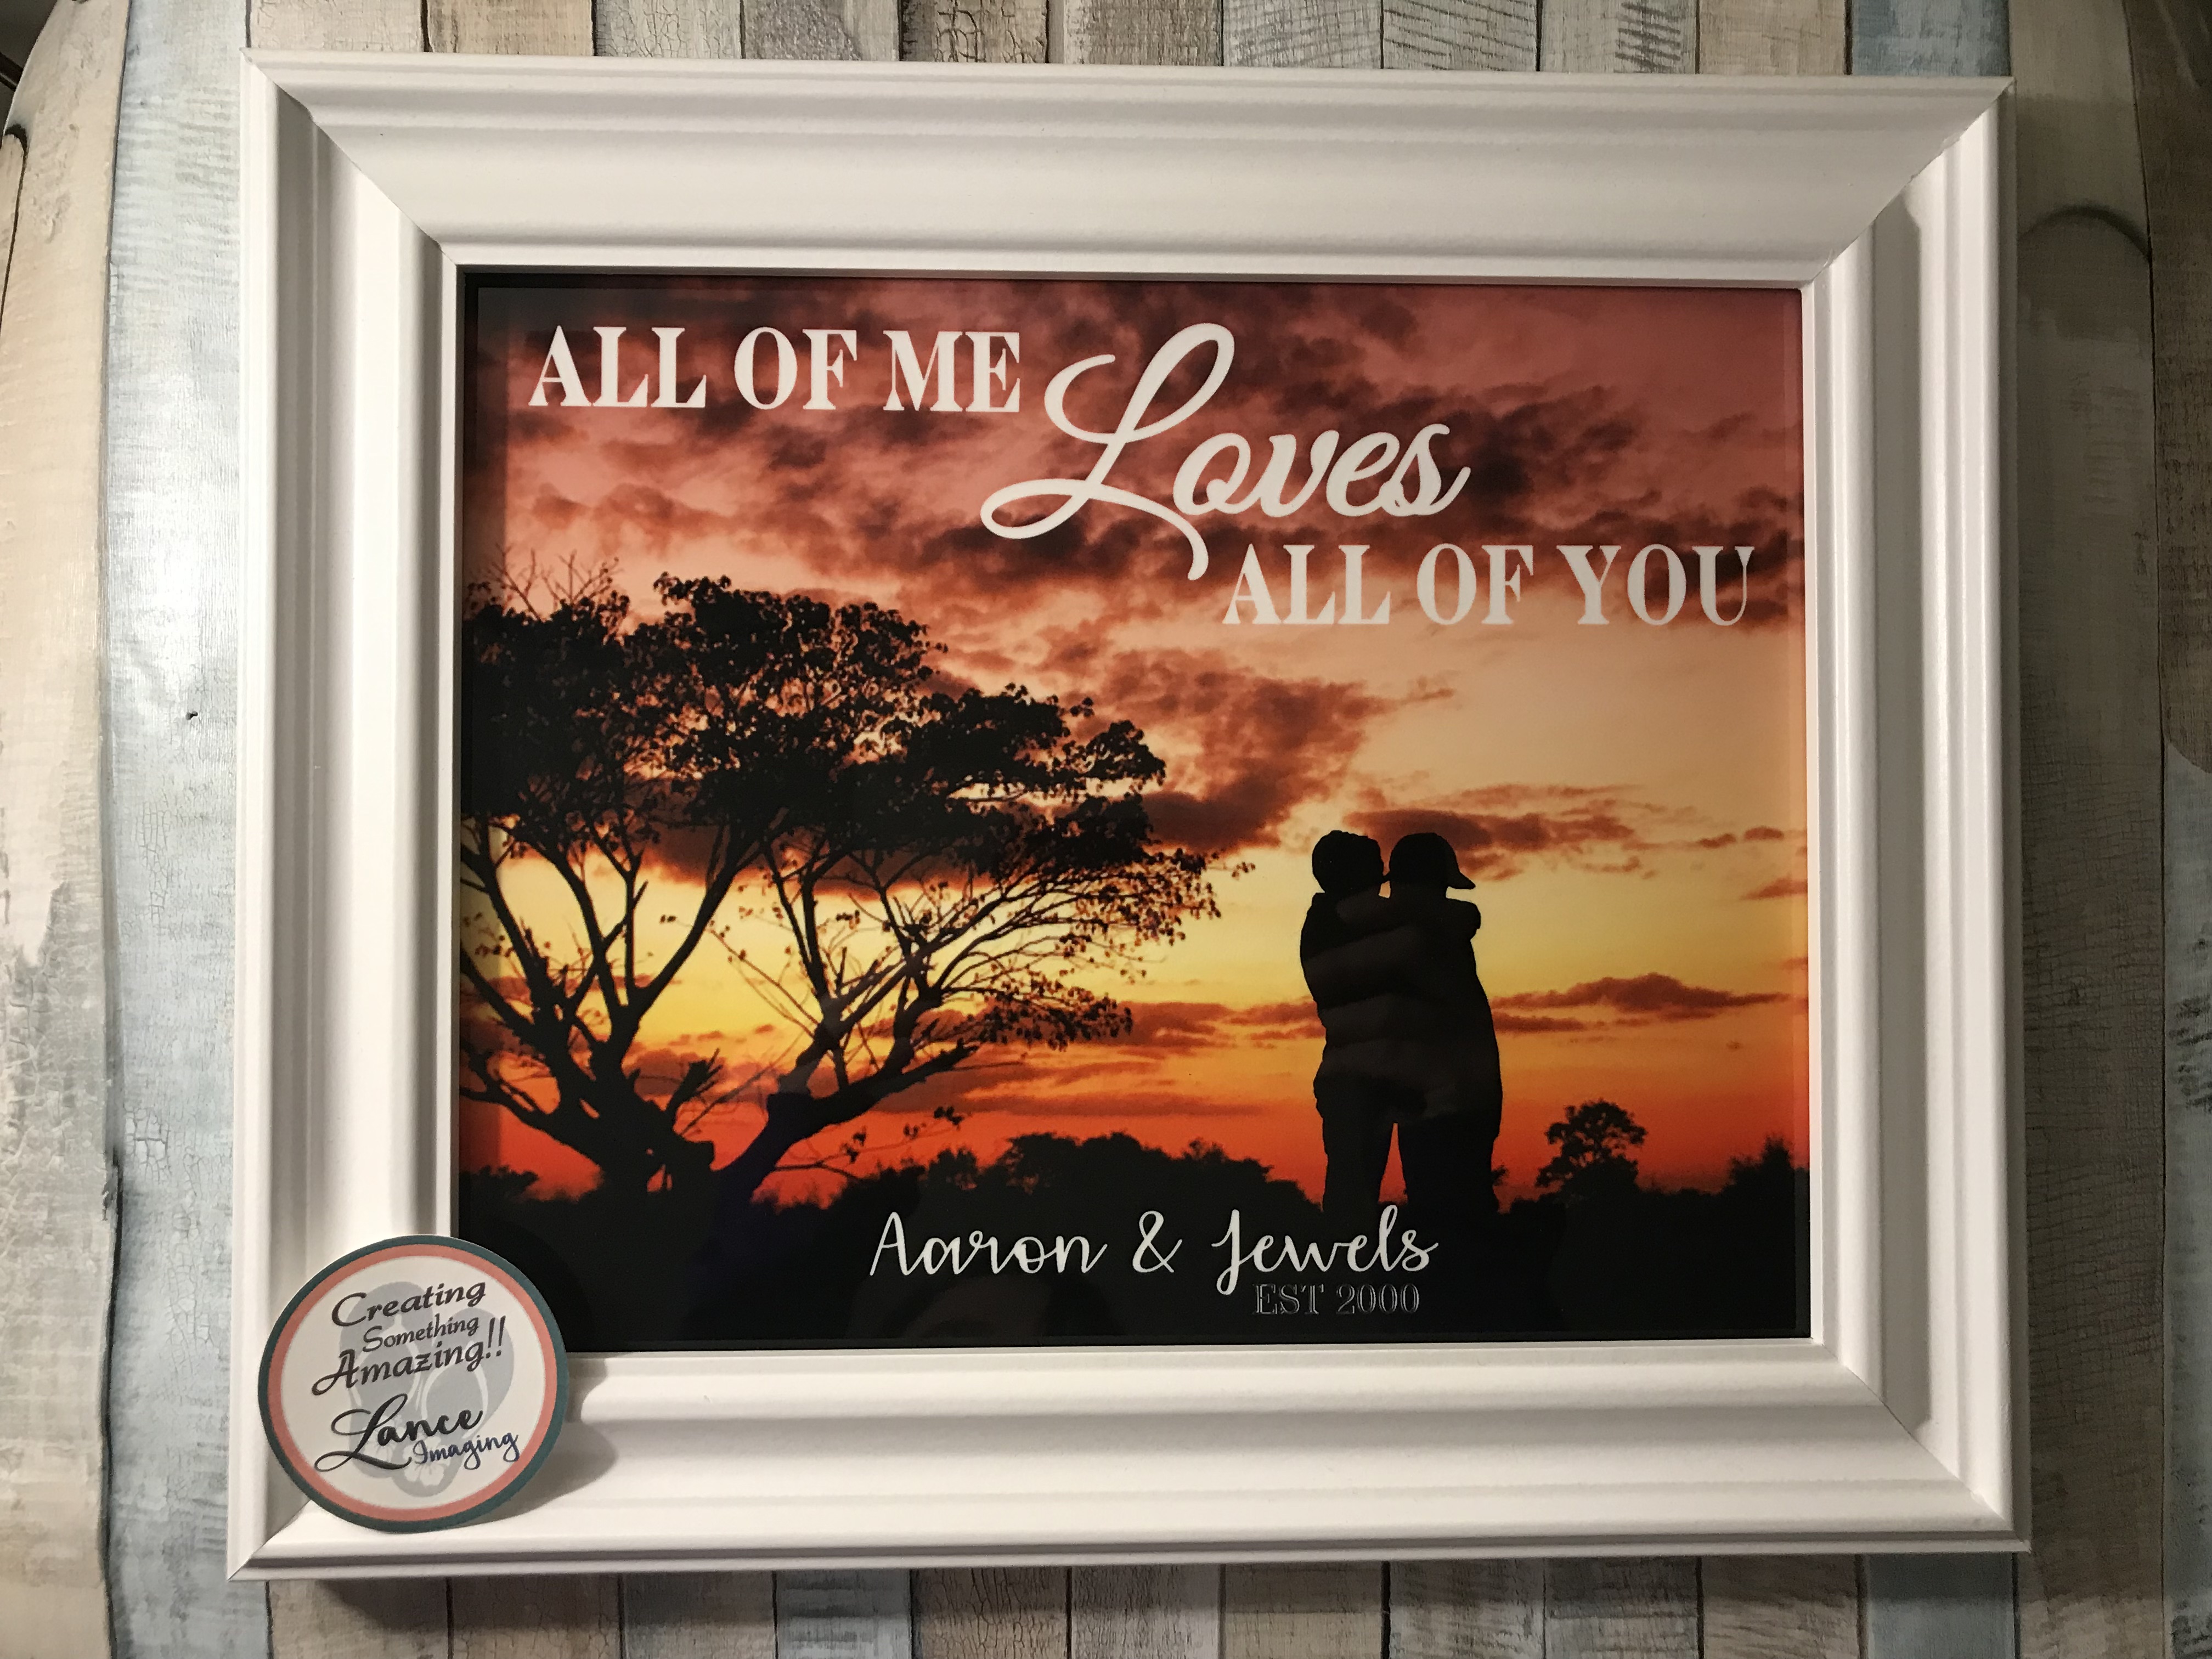 All of me loves all of you made with sublimation printing